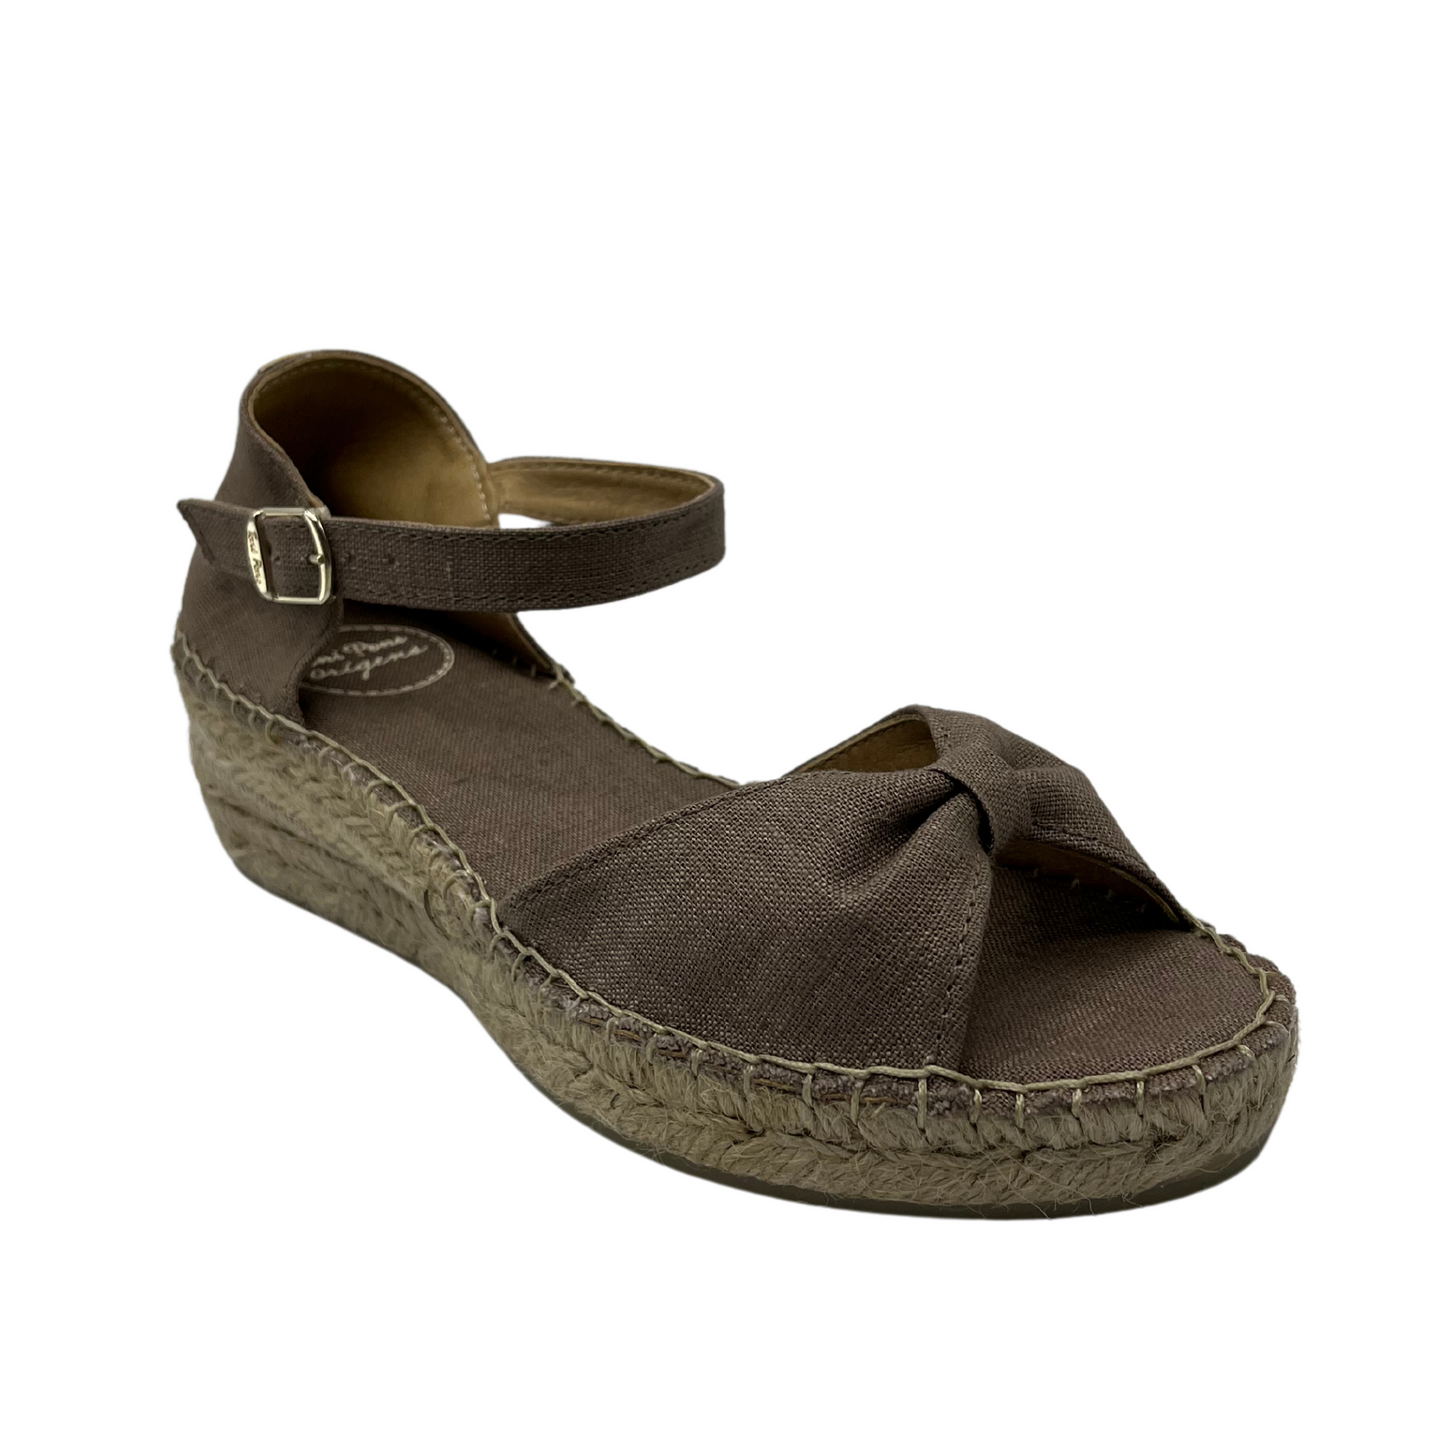 45 degree angled view of taupe sandal with low wedge heel and bow strap on toe